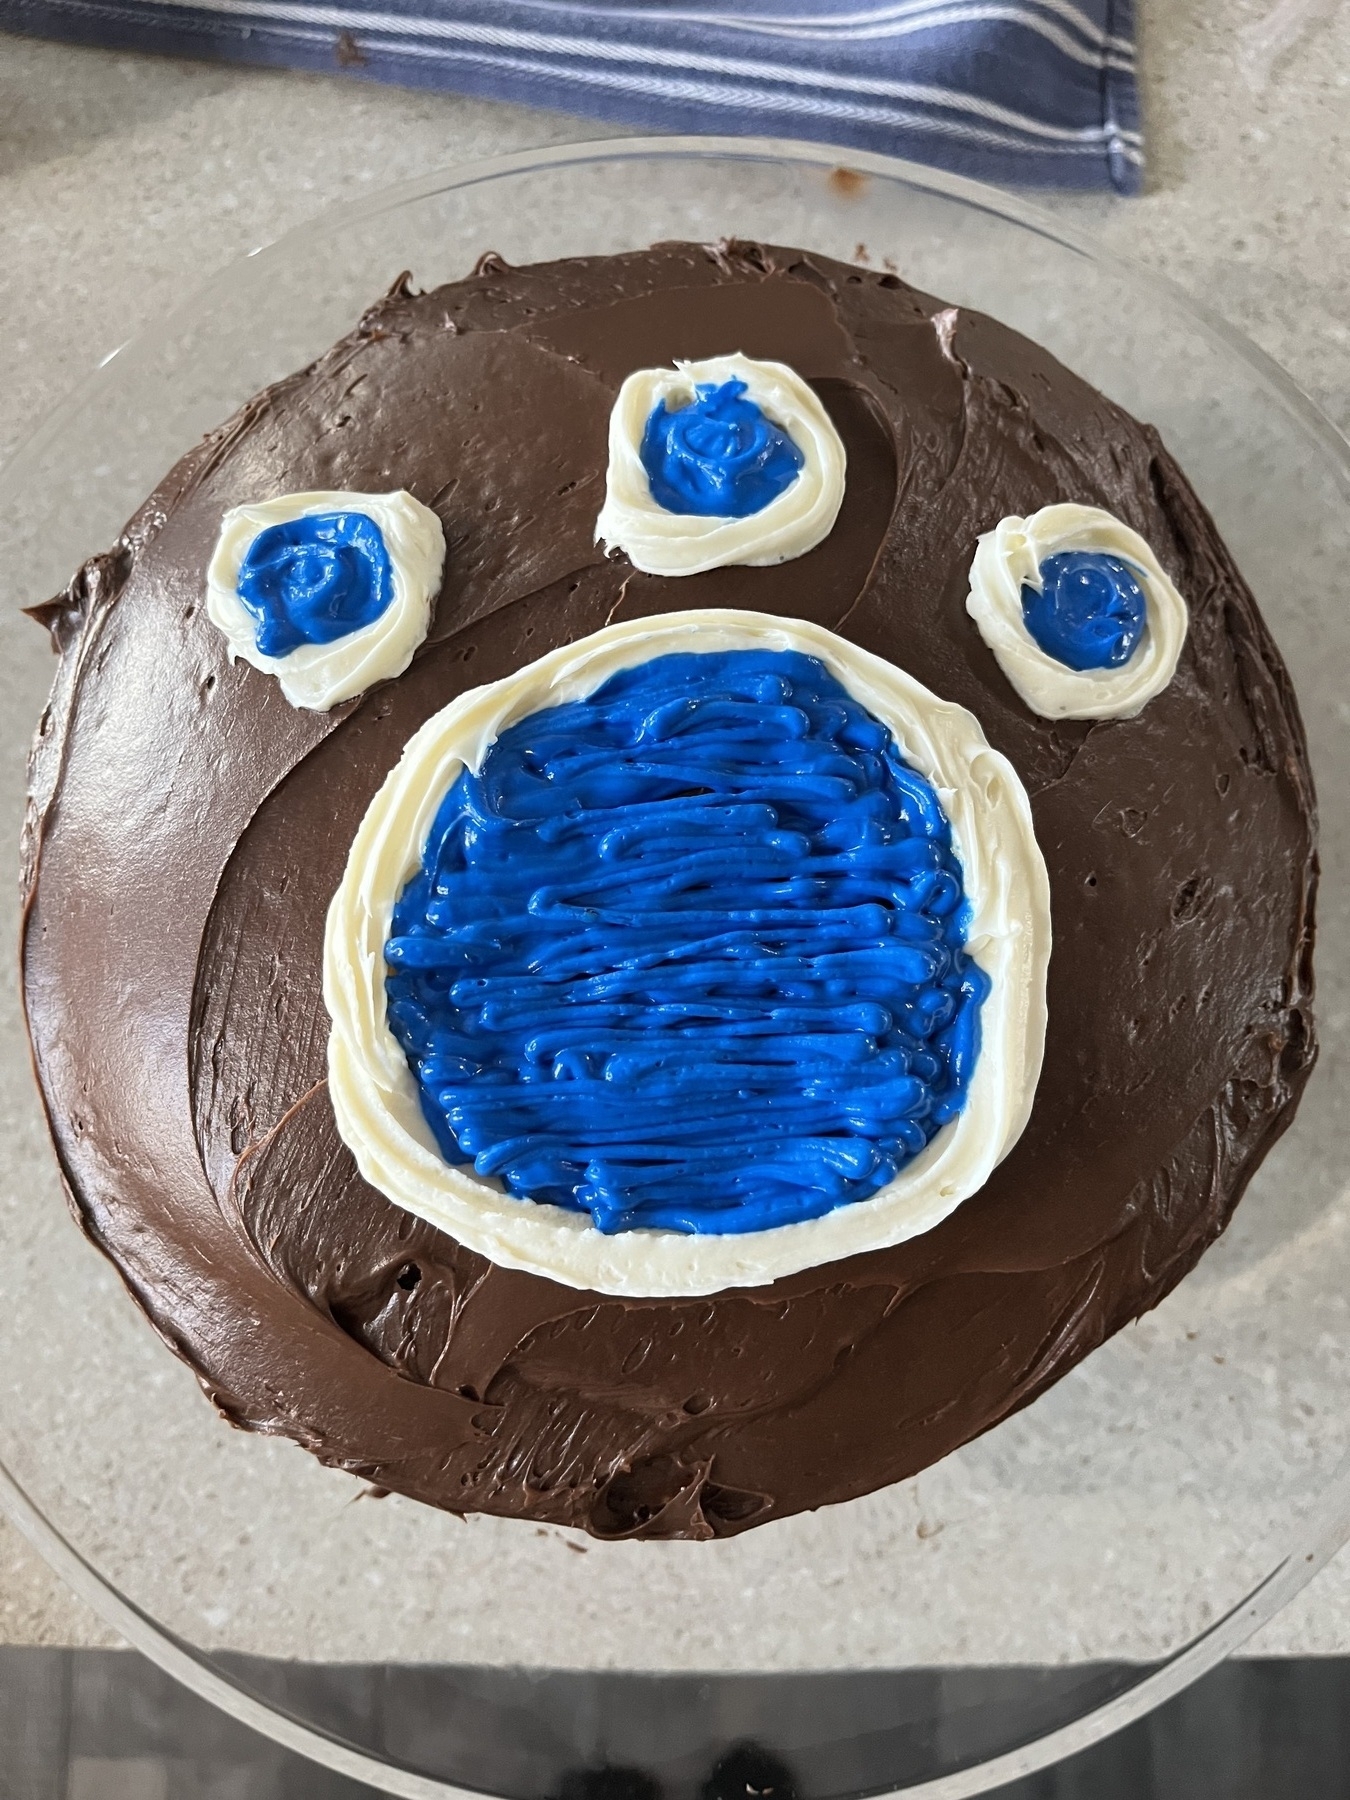 Chocolate cake with blue icing in the shape of a paw print